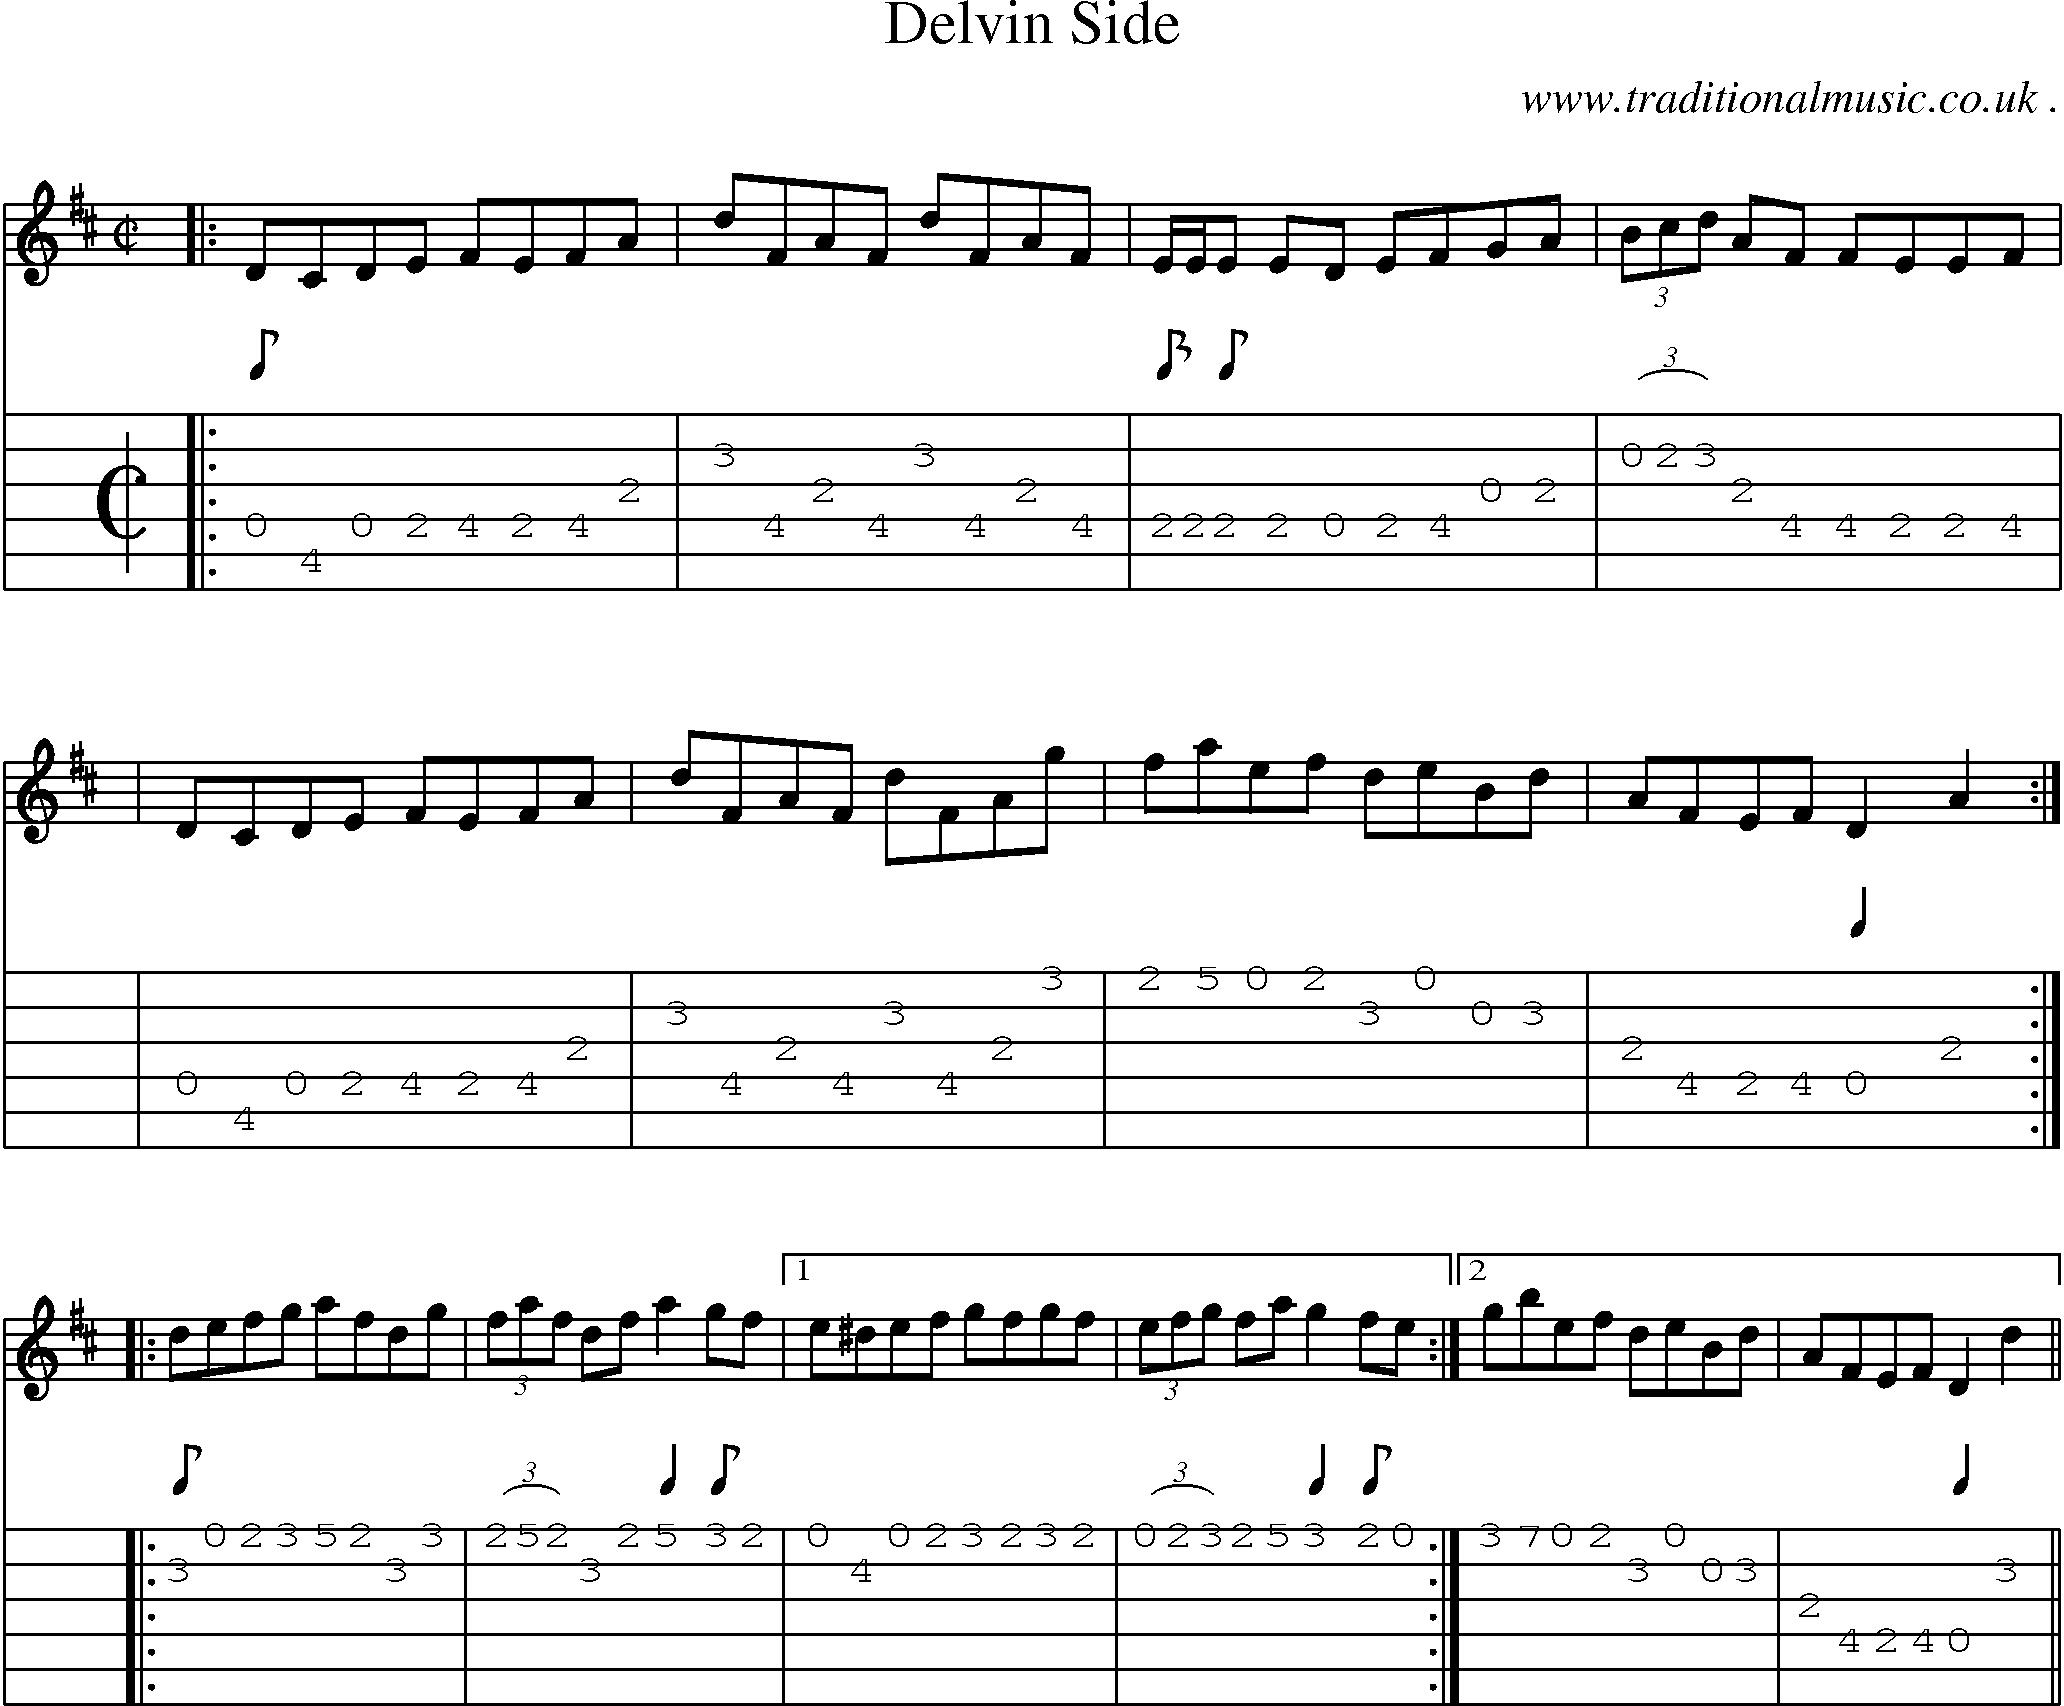 Sheet-music  score, Chords and Guitar Tabs for Delvin Side